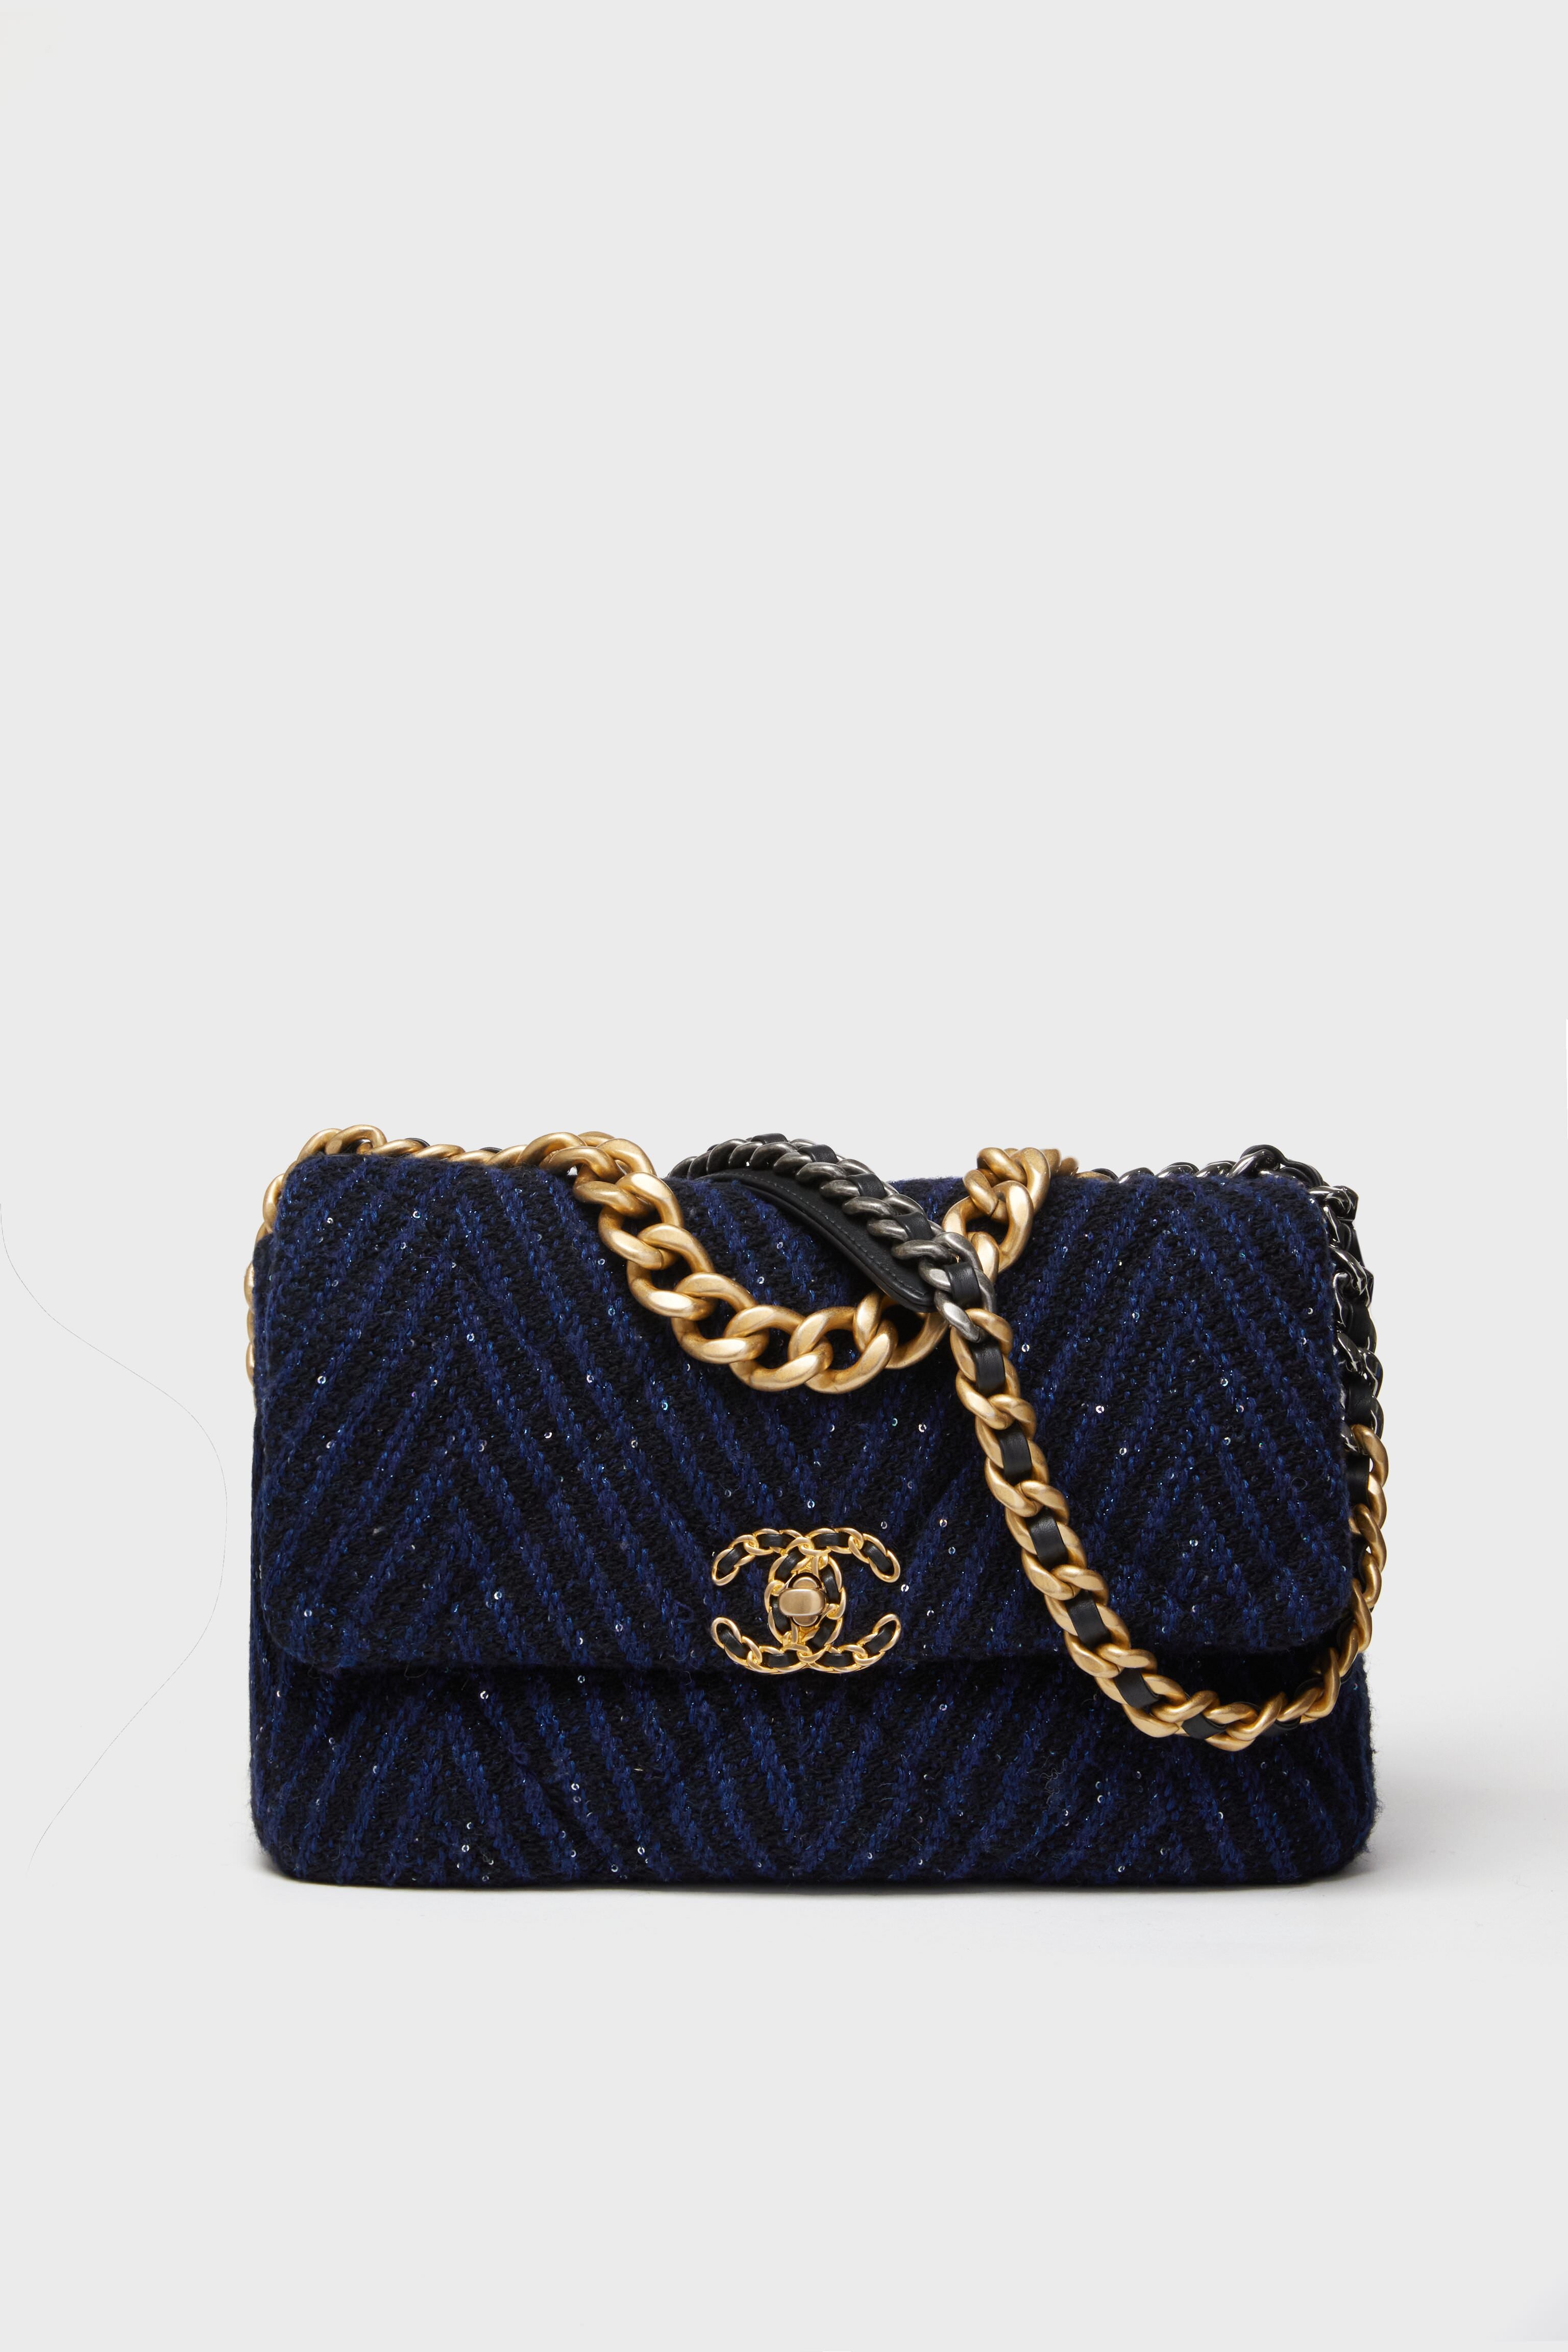 Chanel Navy Tweed 19 Bag  Tuckernuck Archive Collection